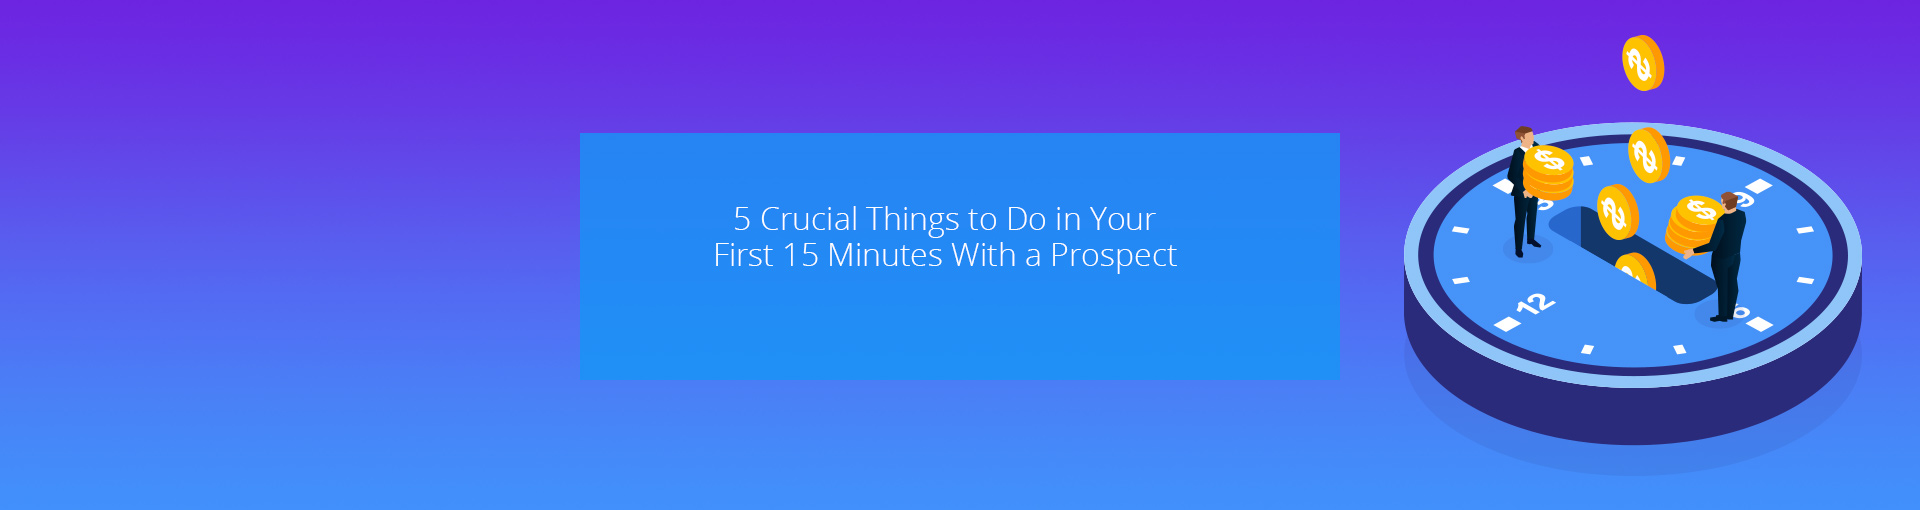 5 Crucial Things to Do in Your First 15 Minutes With a Prospective Client Featured Image